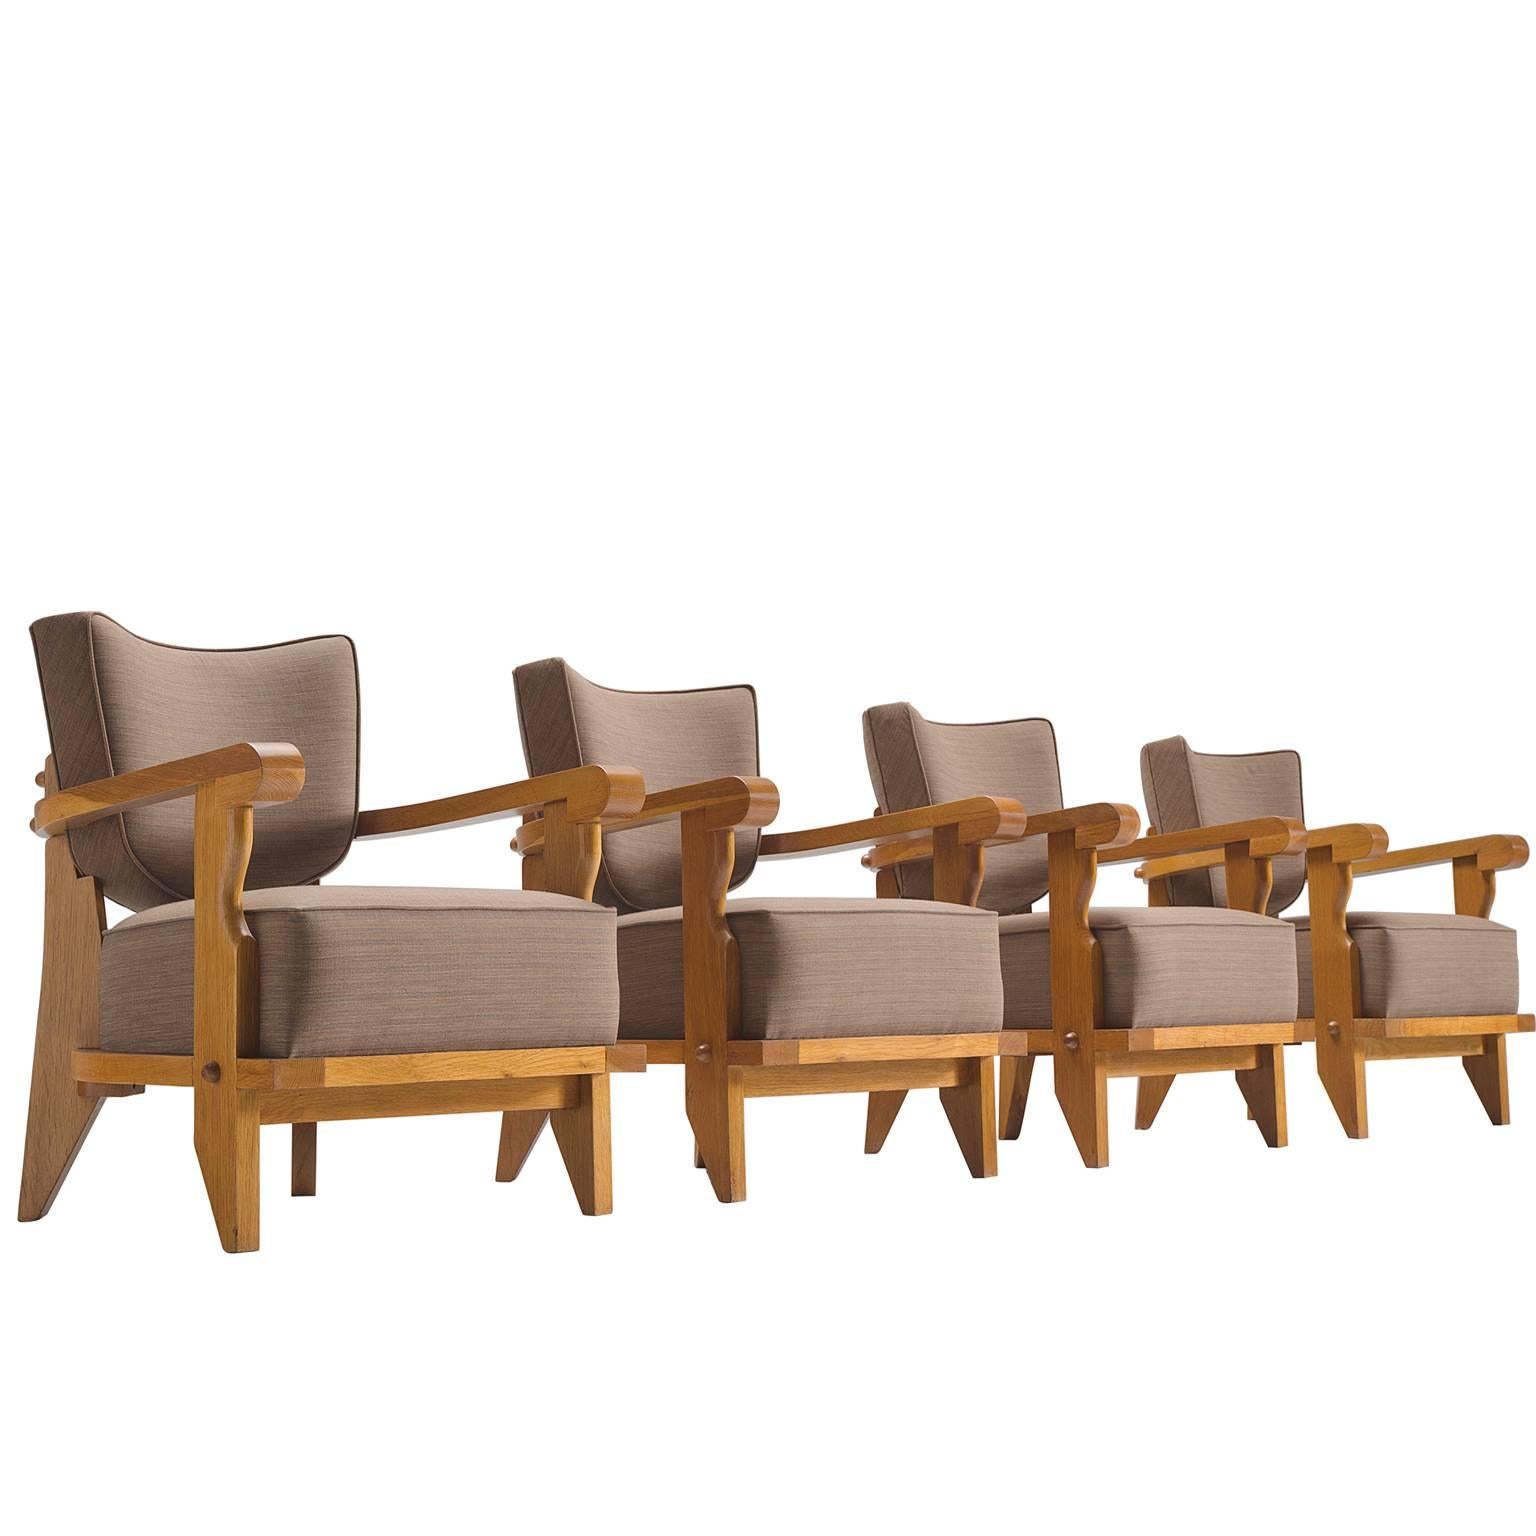 Guillerme & Chambron Carved Set of Four Oak Club Chairs, 1950s